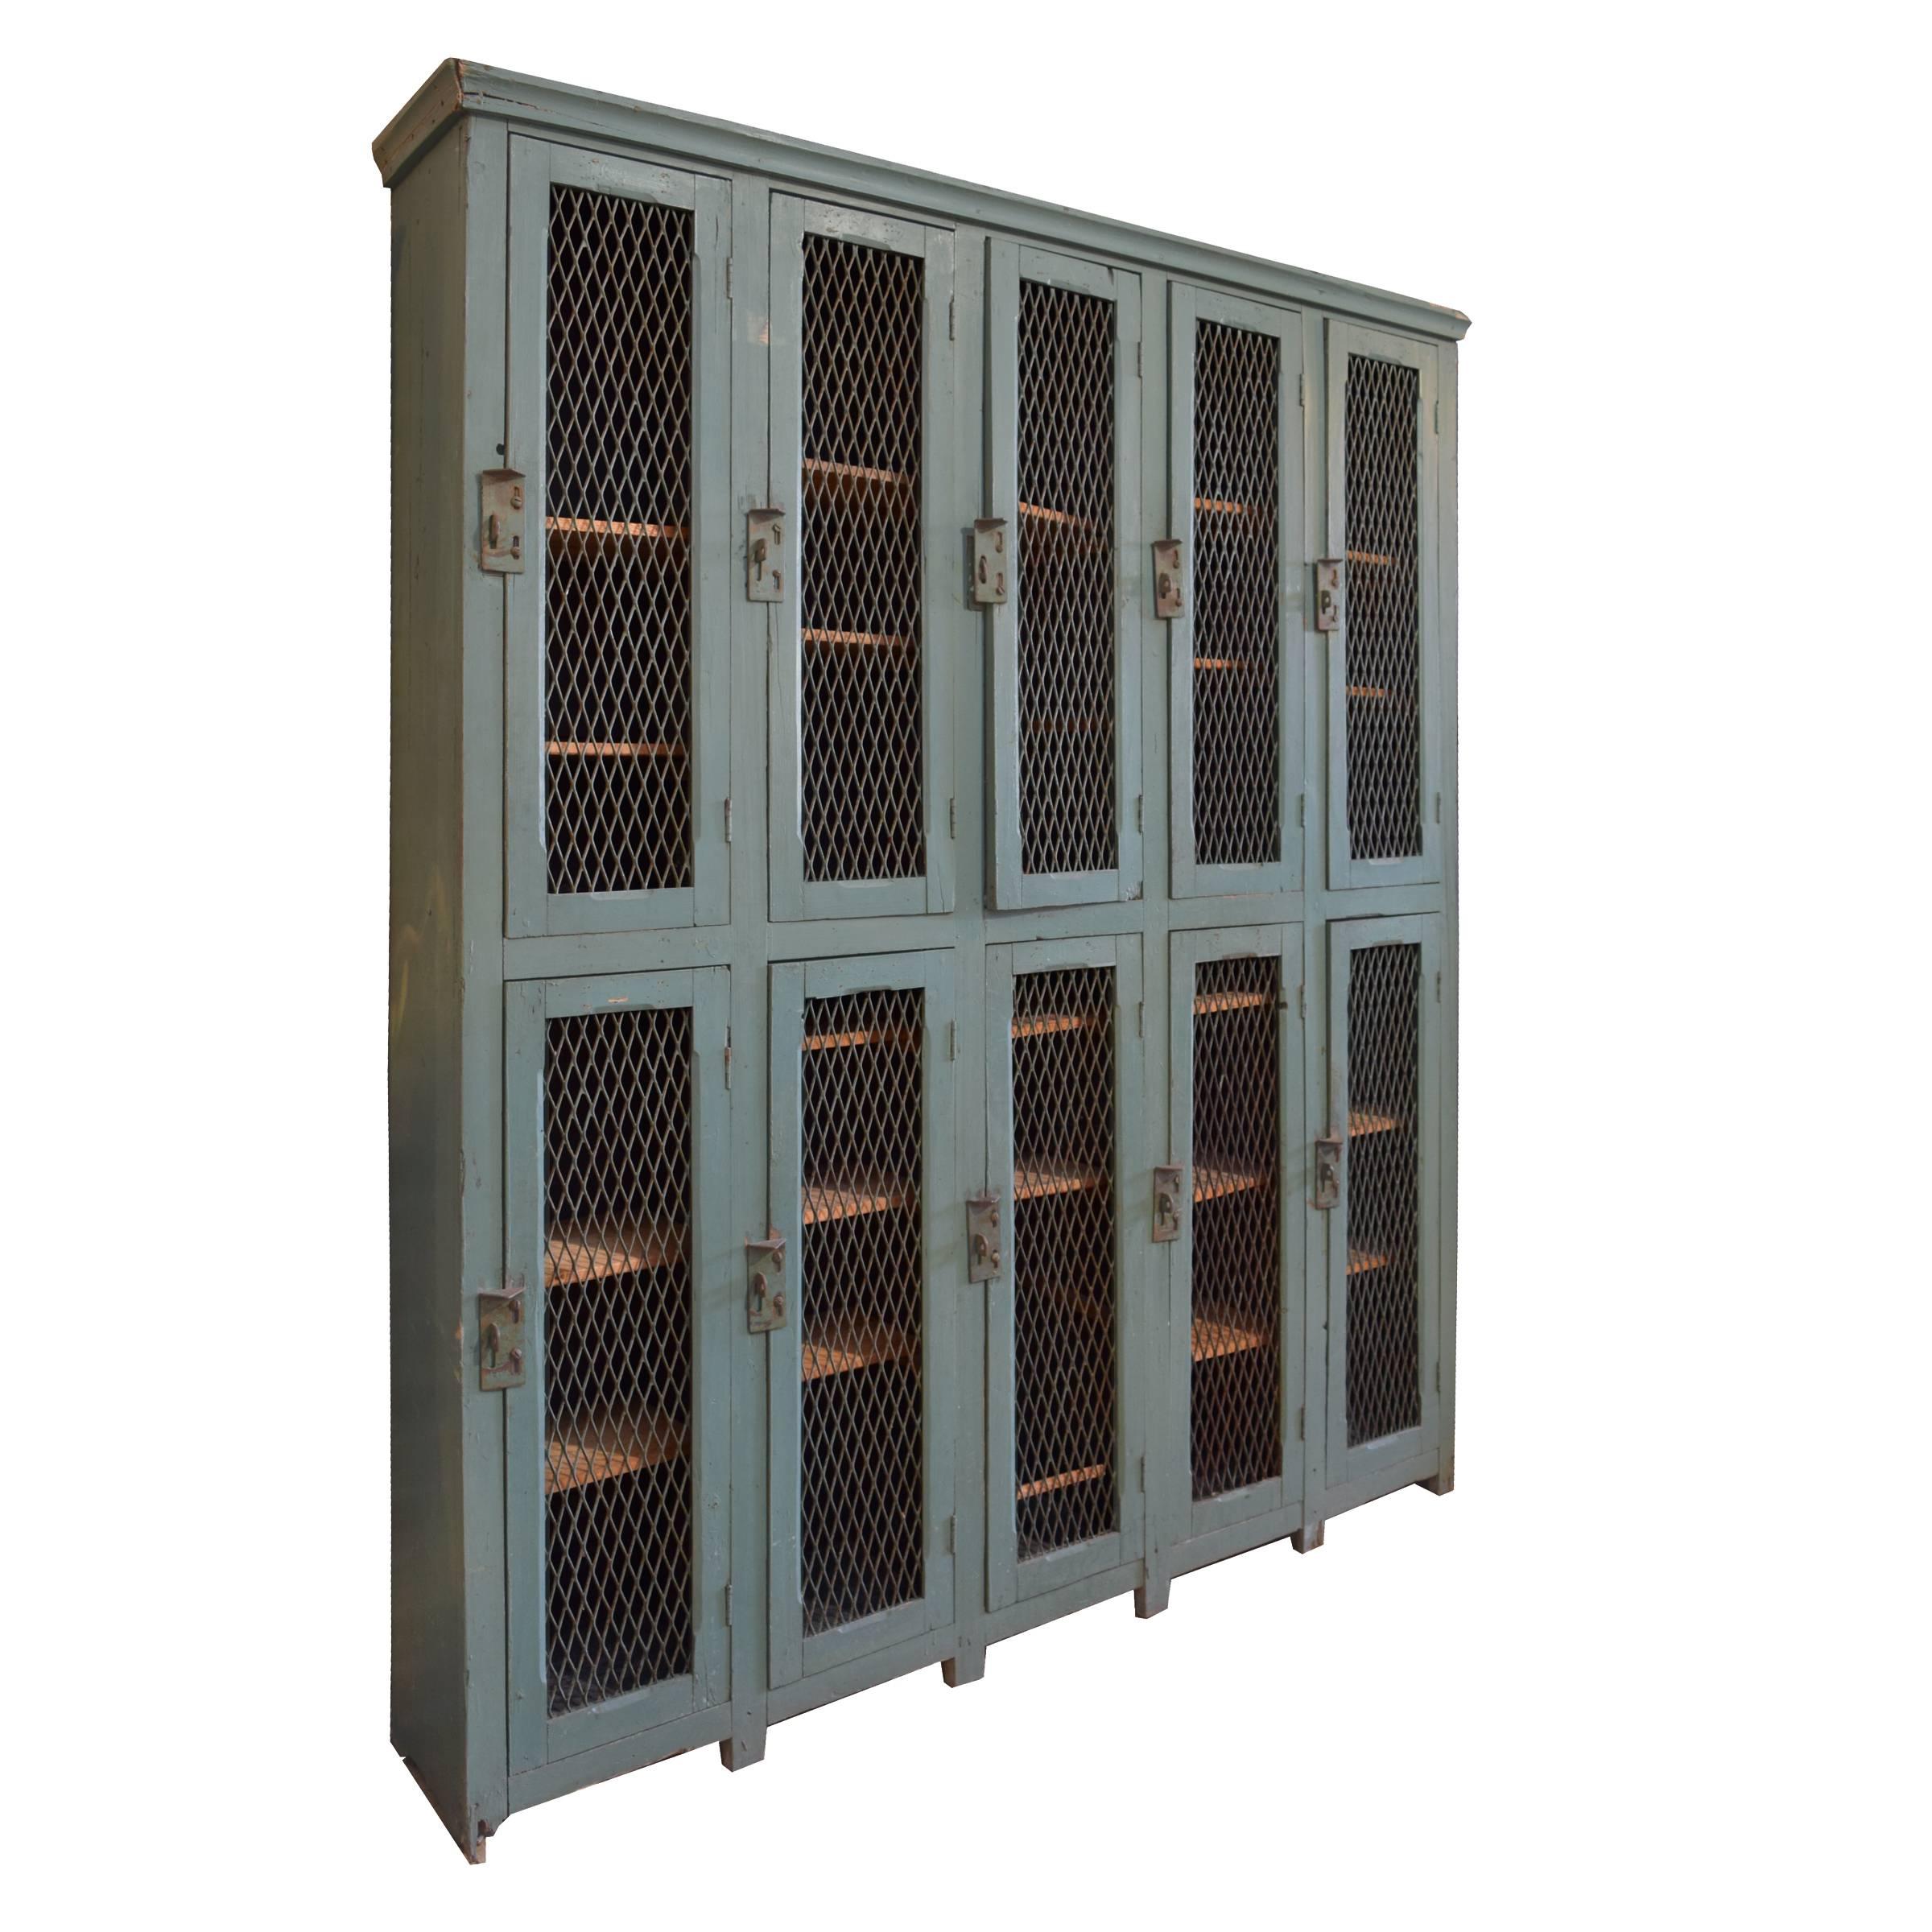 A fantastic Italian locker with ten doors, interior shelves, and a great green color, circa 1940. Pair available.